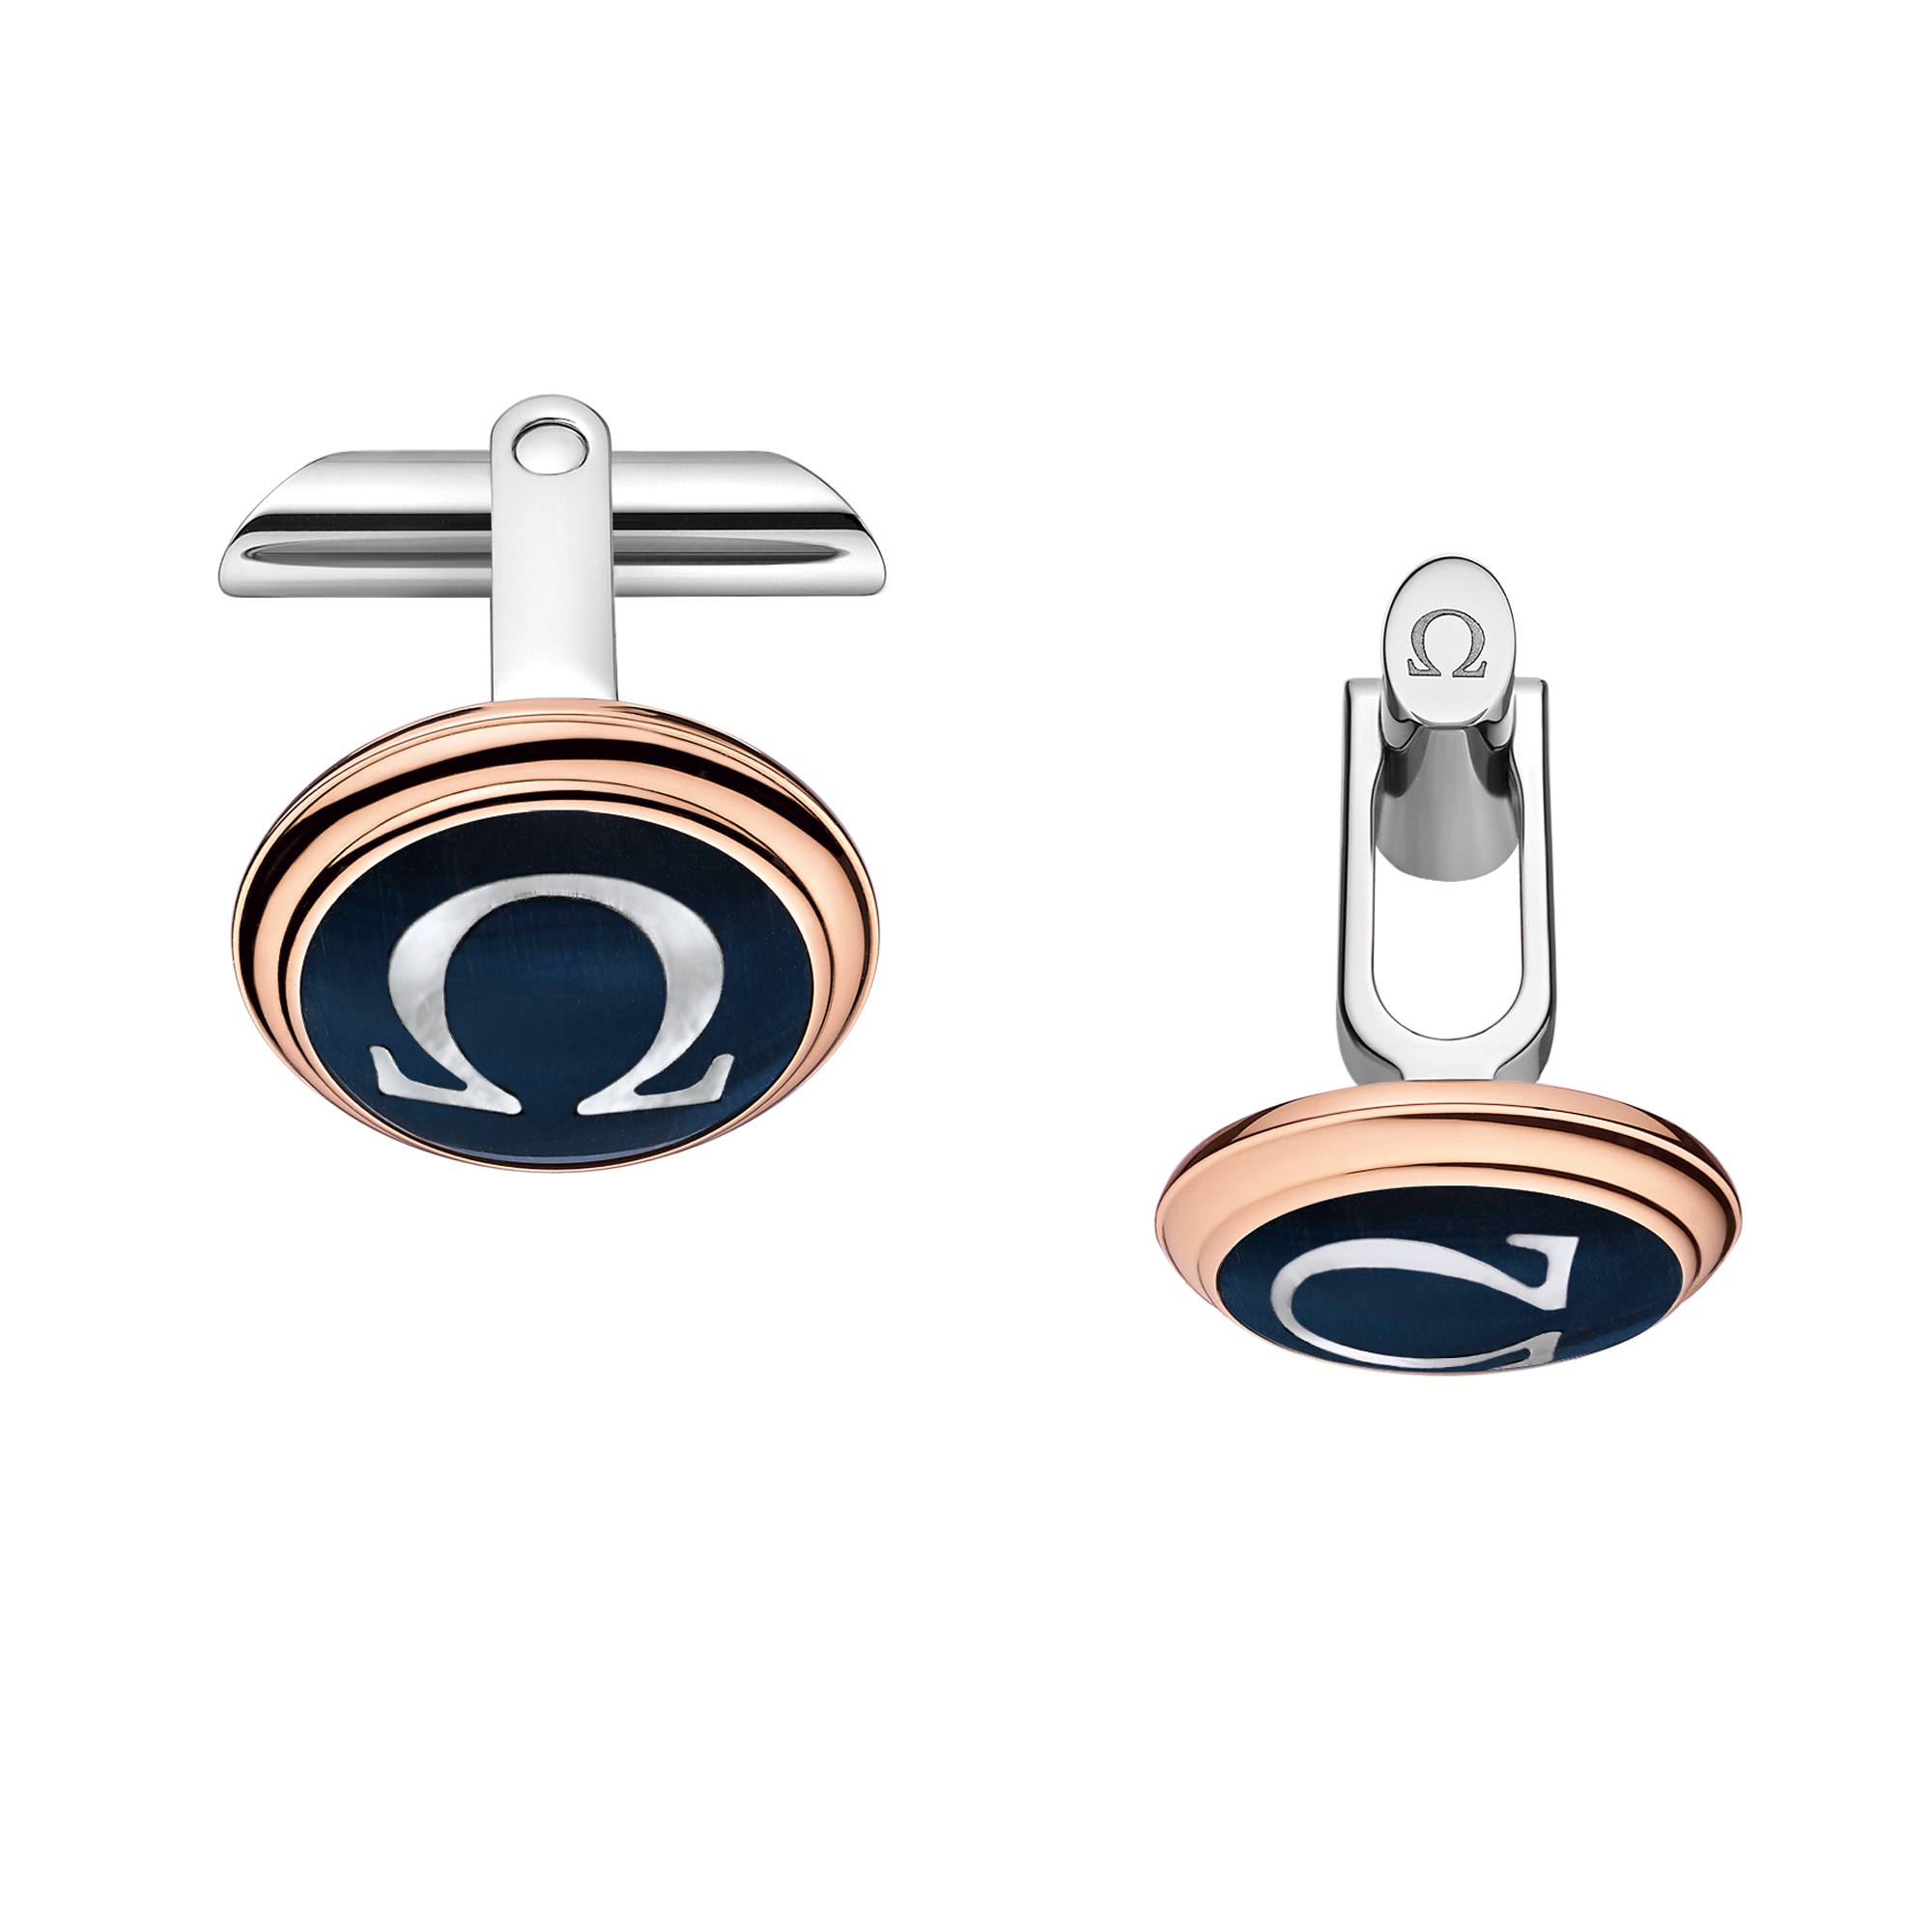 Omegamania Cufflinks, 18K red gold, Mother-of-pearl cabochon, Stainless steel - CA02DG0700305